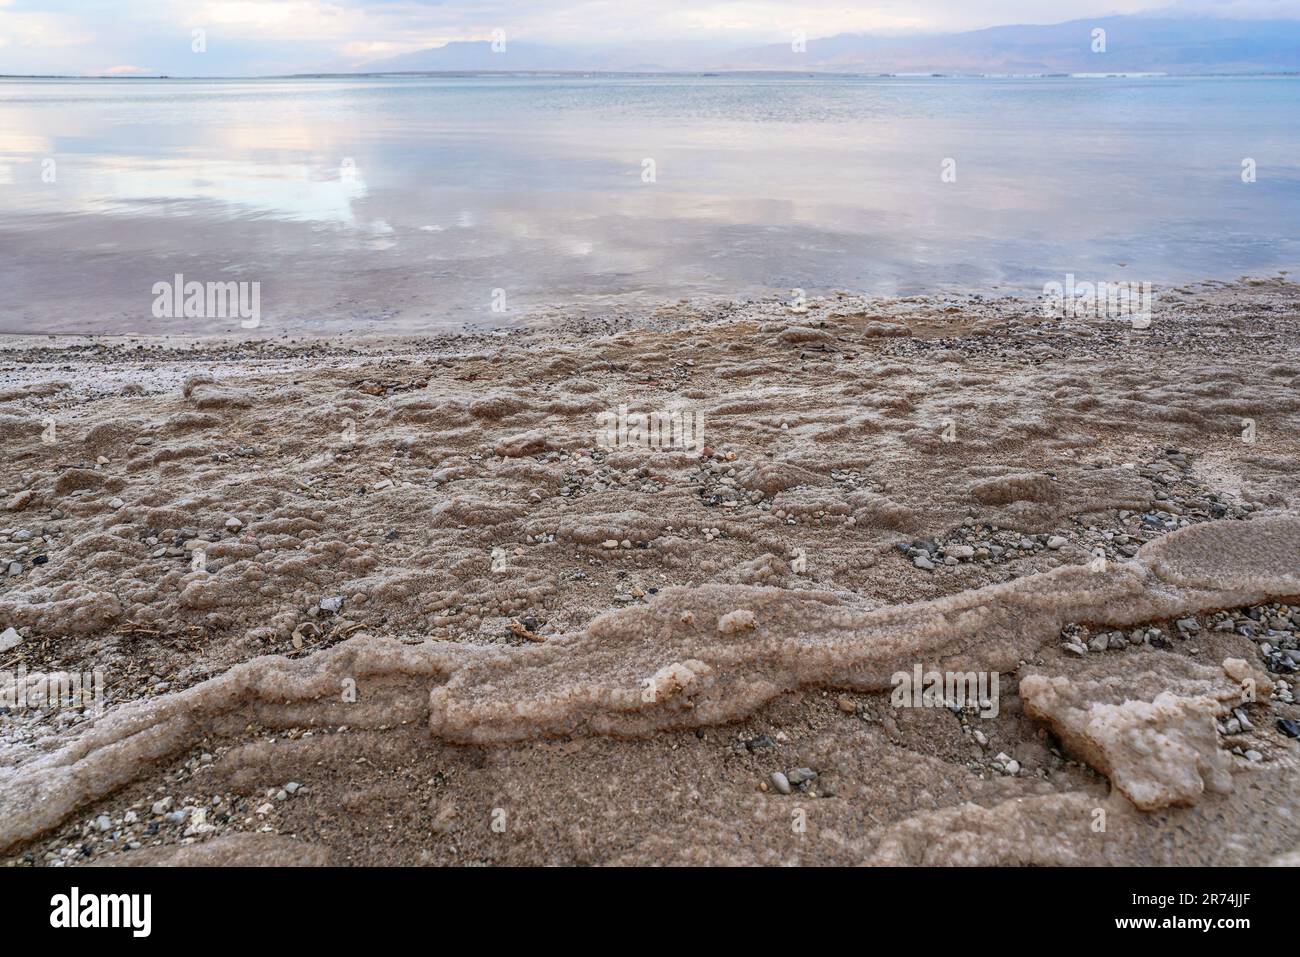 Sand and stones covered with crystalline salt on shore of Dead Sea, clear water background - typical morning scenery at Ein Bokek beach, Israel Stock Photo